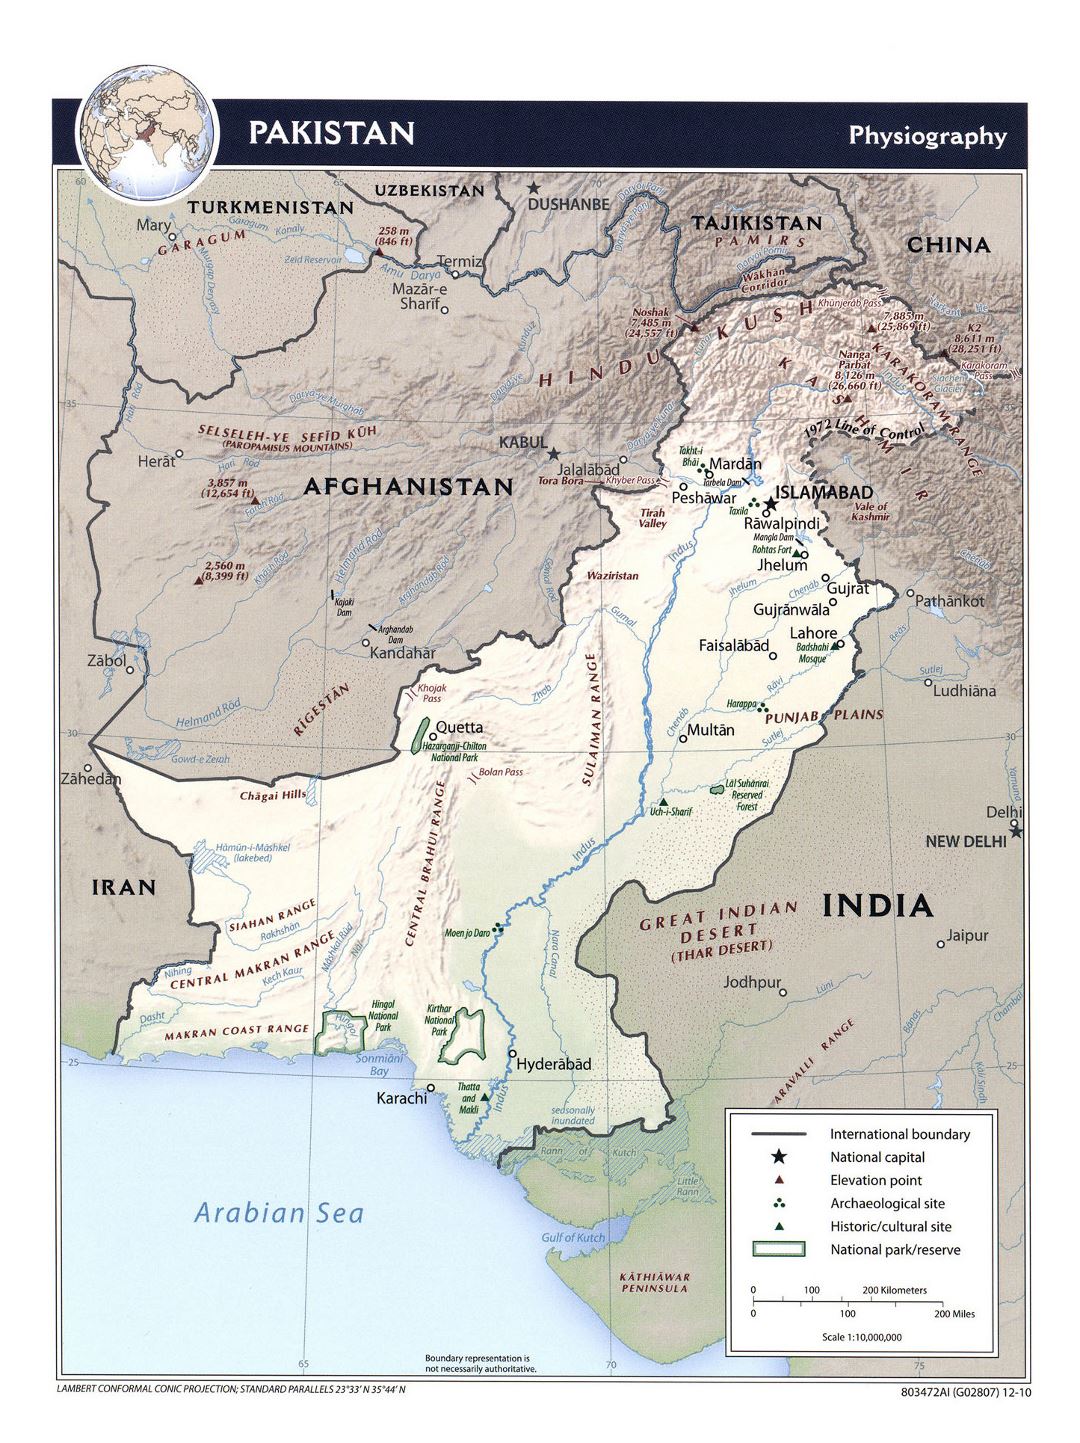 Detailed physiography map of Pakistan - 2010